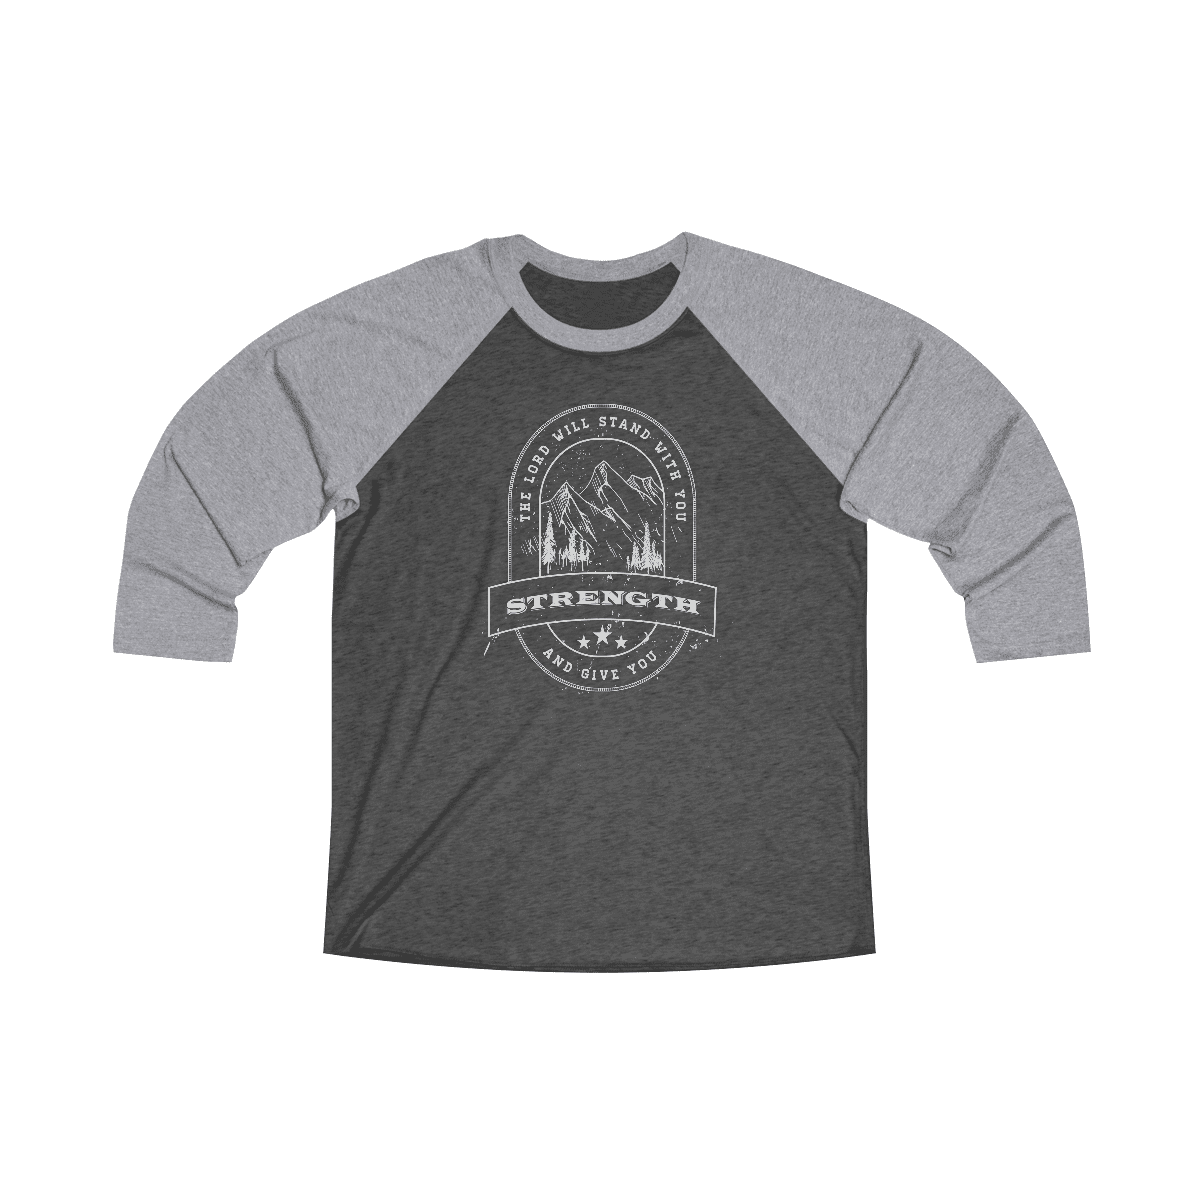 When you wear this Reglan Tee, you are instantly empowered with the truth that God will stand with you and give you strength. No matter what life throws your way, you can be hopeful knowing that the LORD is right by your side. This shirt is the perfect way to share your faith with those around you and let them know that they are not alone in their struggles. With its simple and encouraging message, you can help lead someone to Christ.